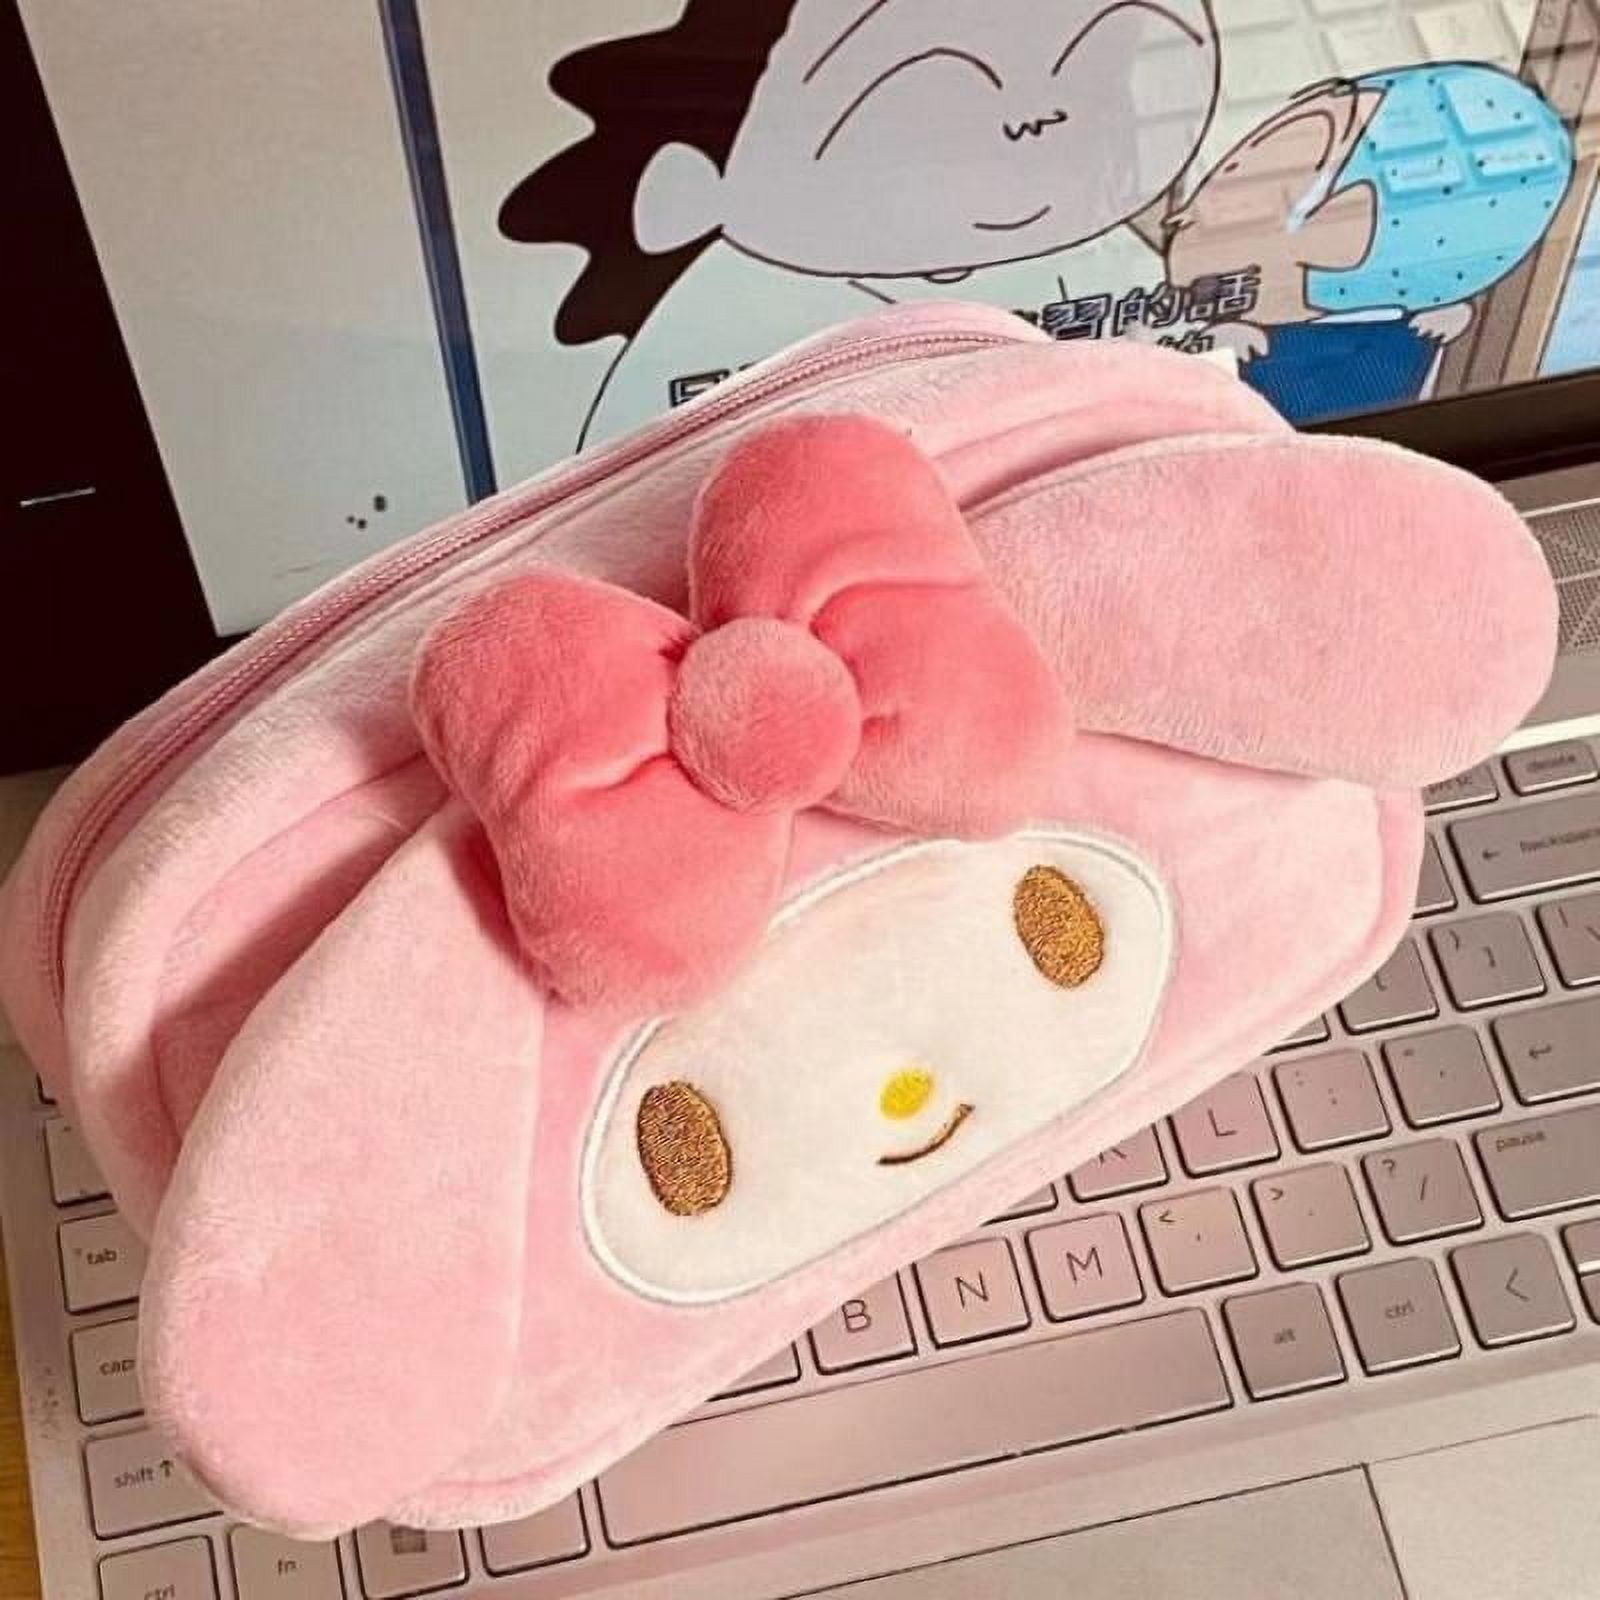 MY MELODY PENCIL CASE POUCH SANRIO CHARACTER CLEAR CONSTELLATION PINK COLOR